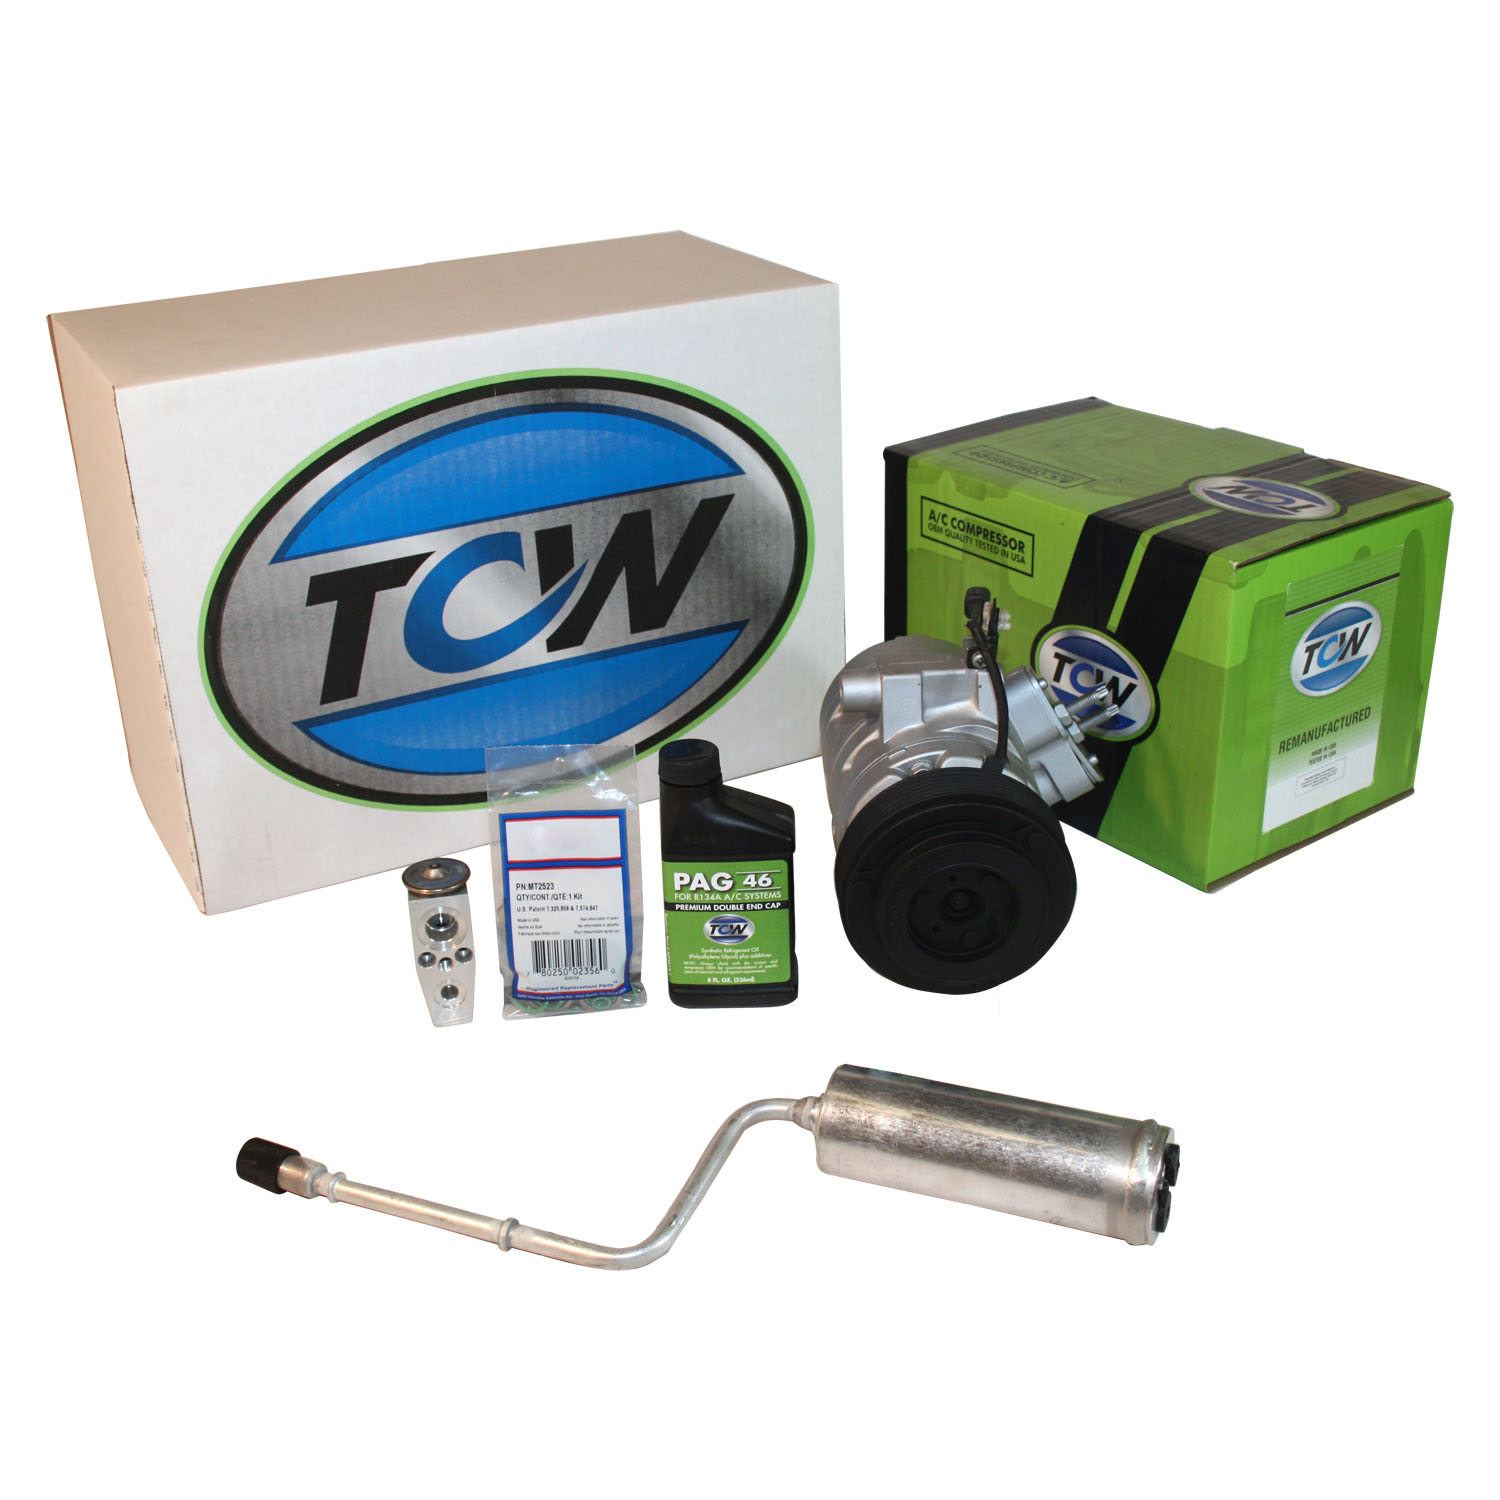 TCW Vehicle A/C Kit K1000446R Remanufactured